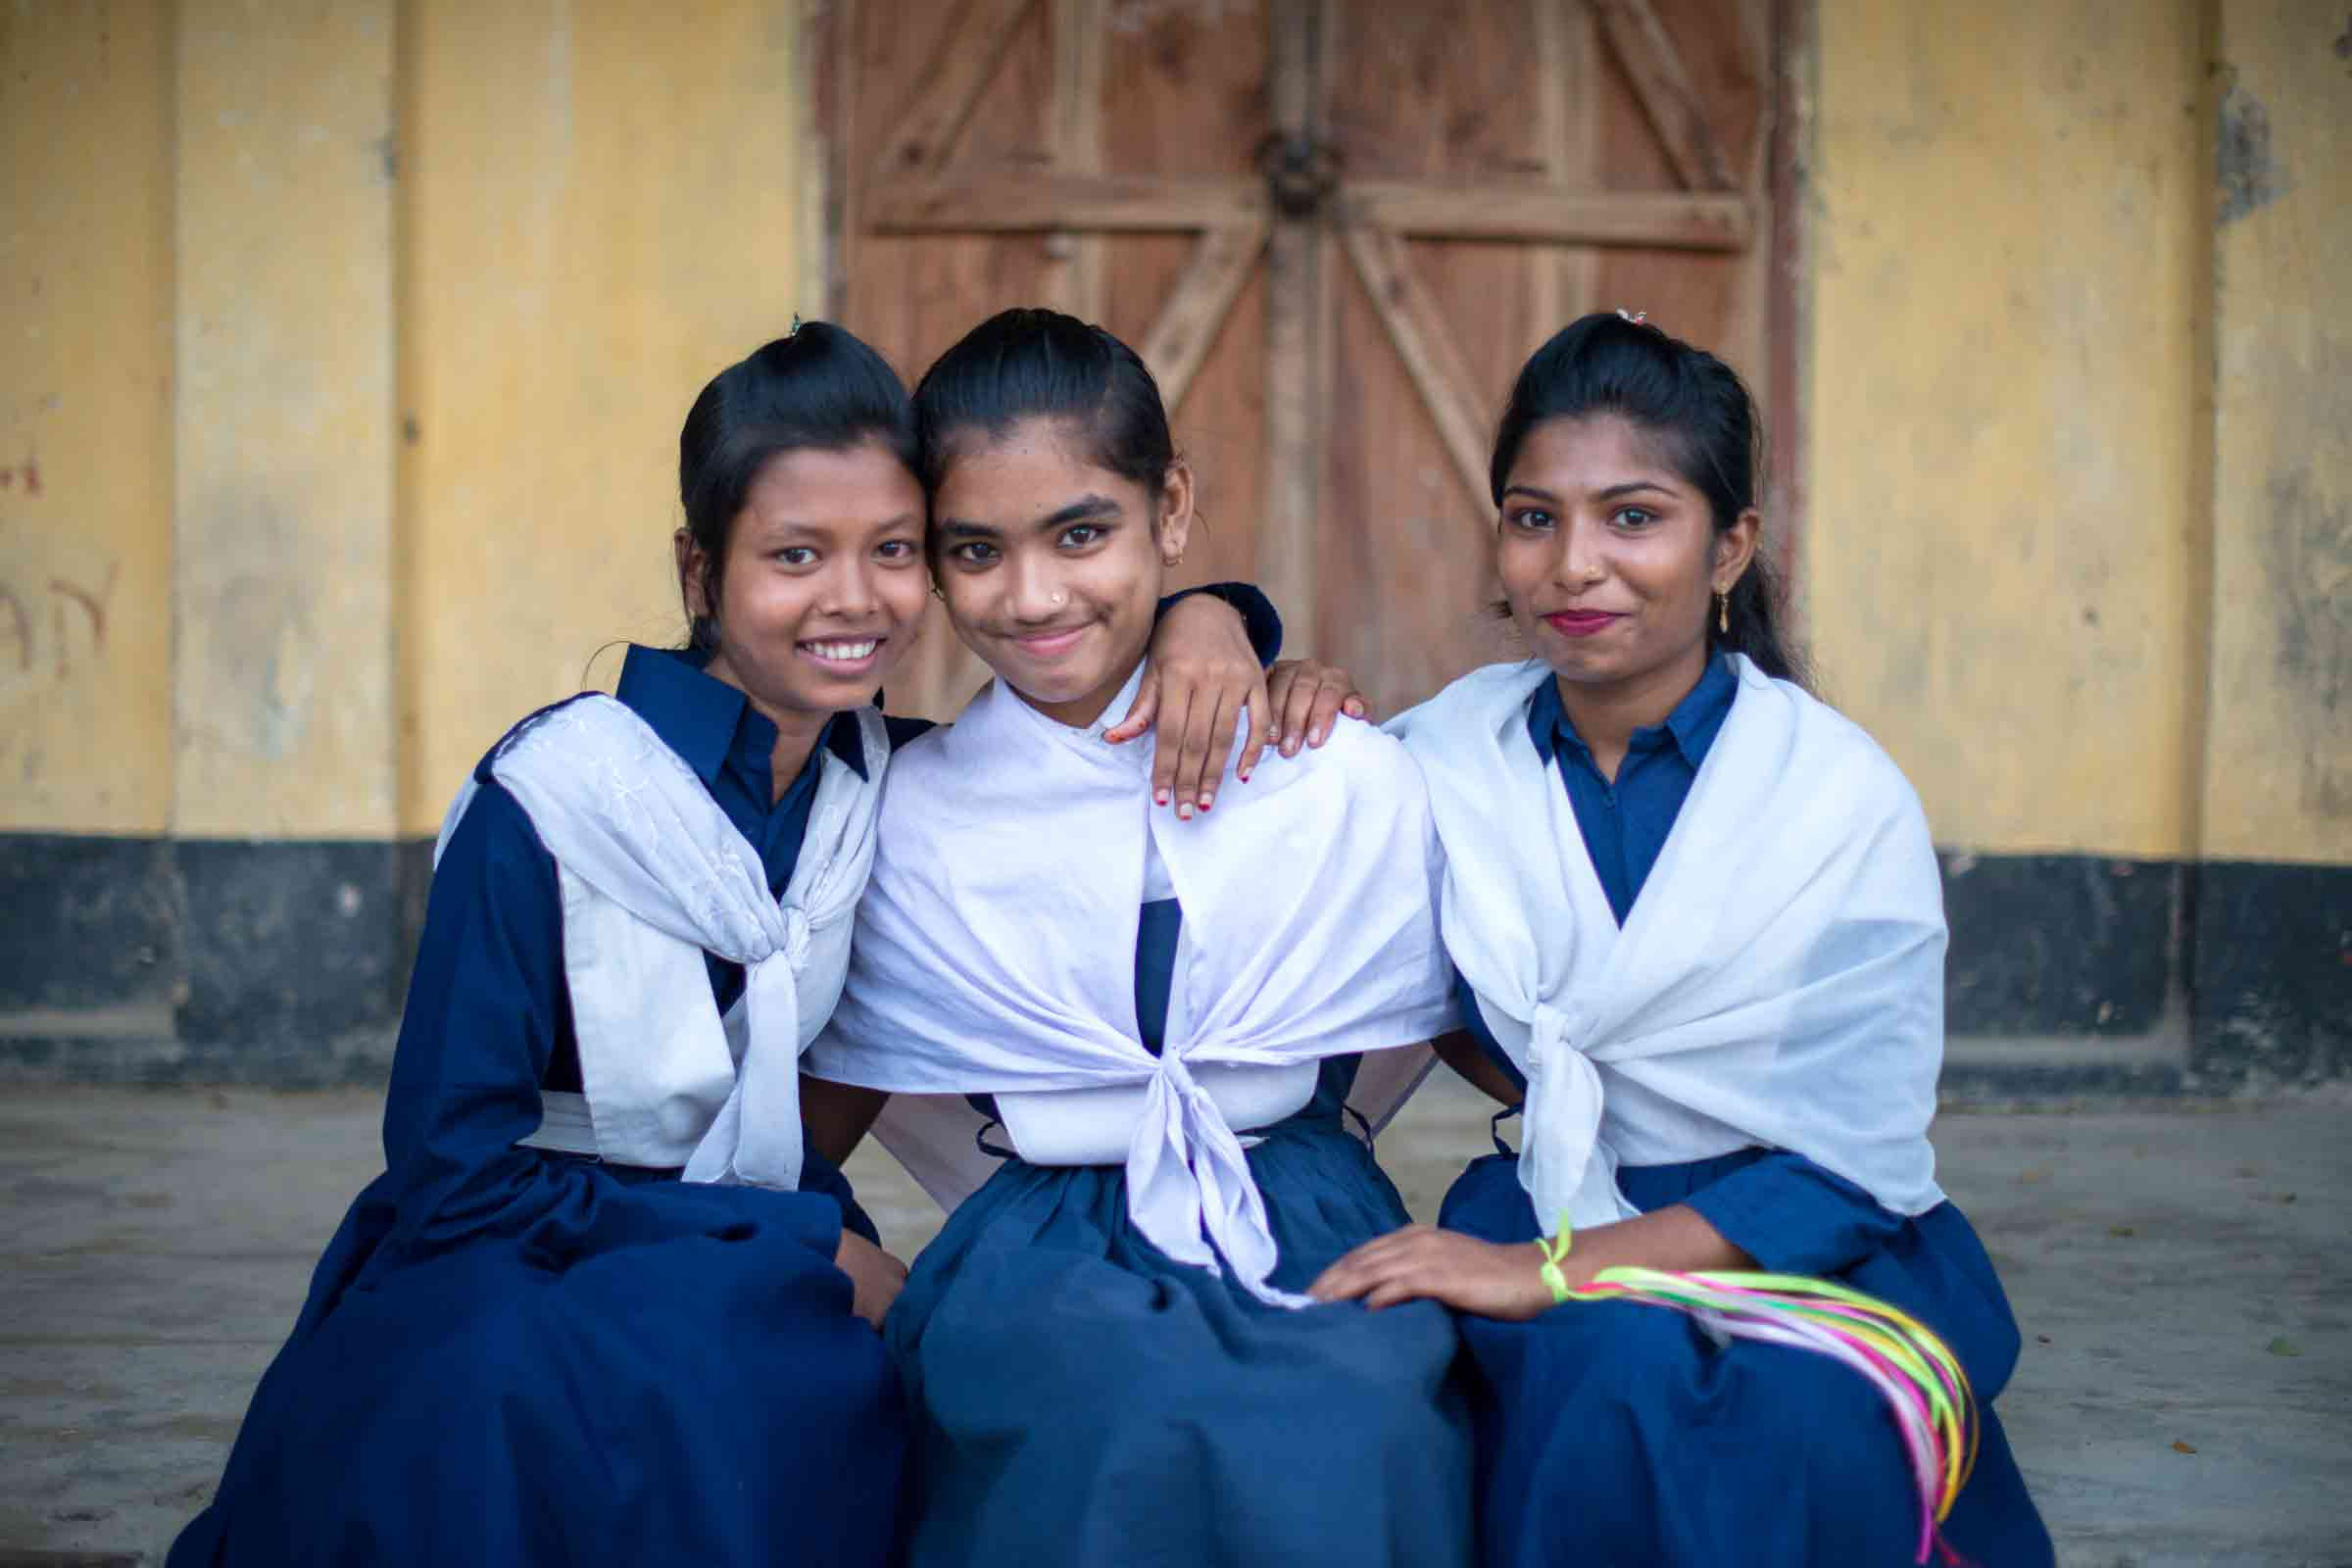 Girls in Bangladesh who received scholarships for school